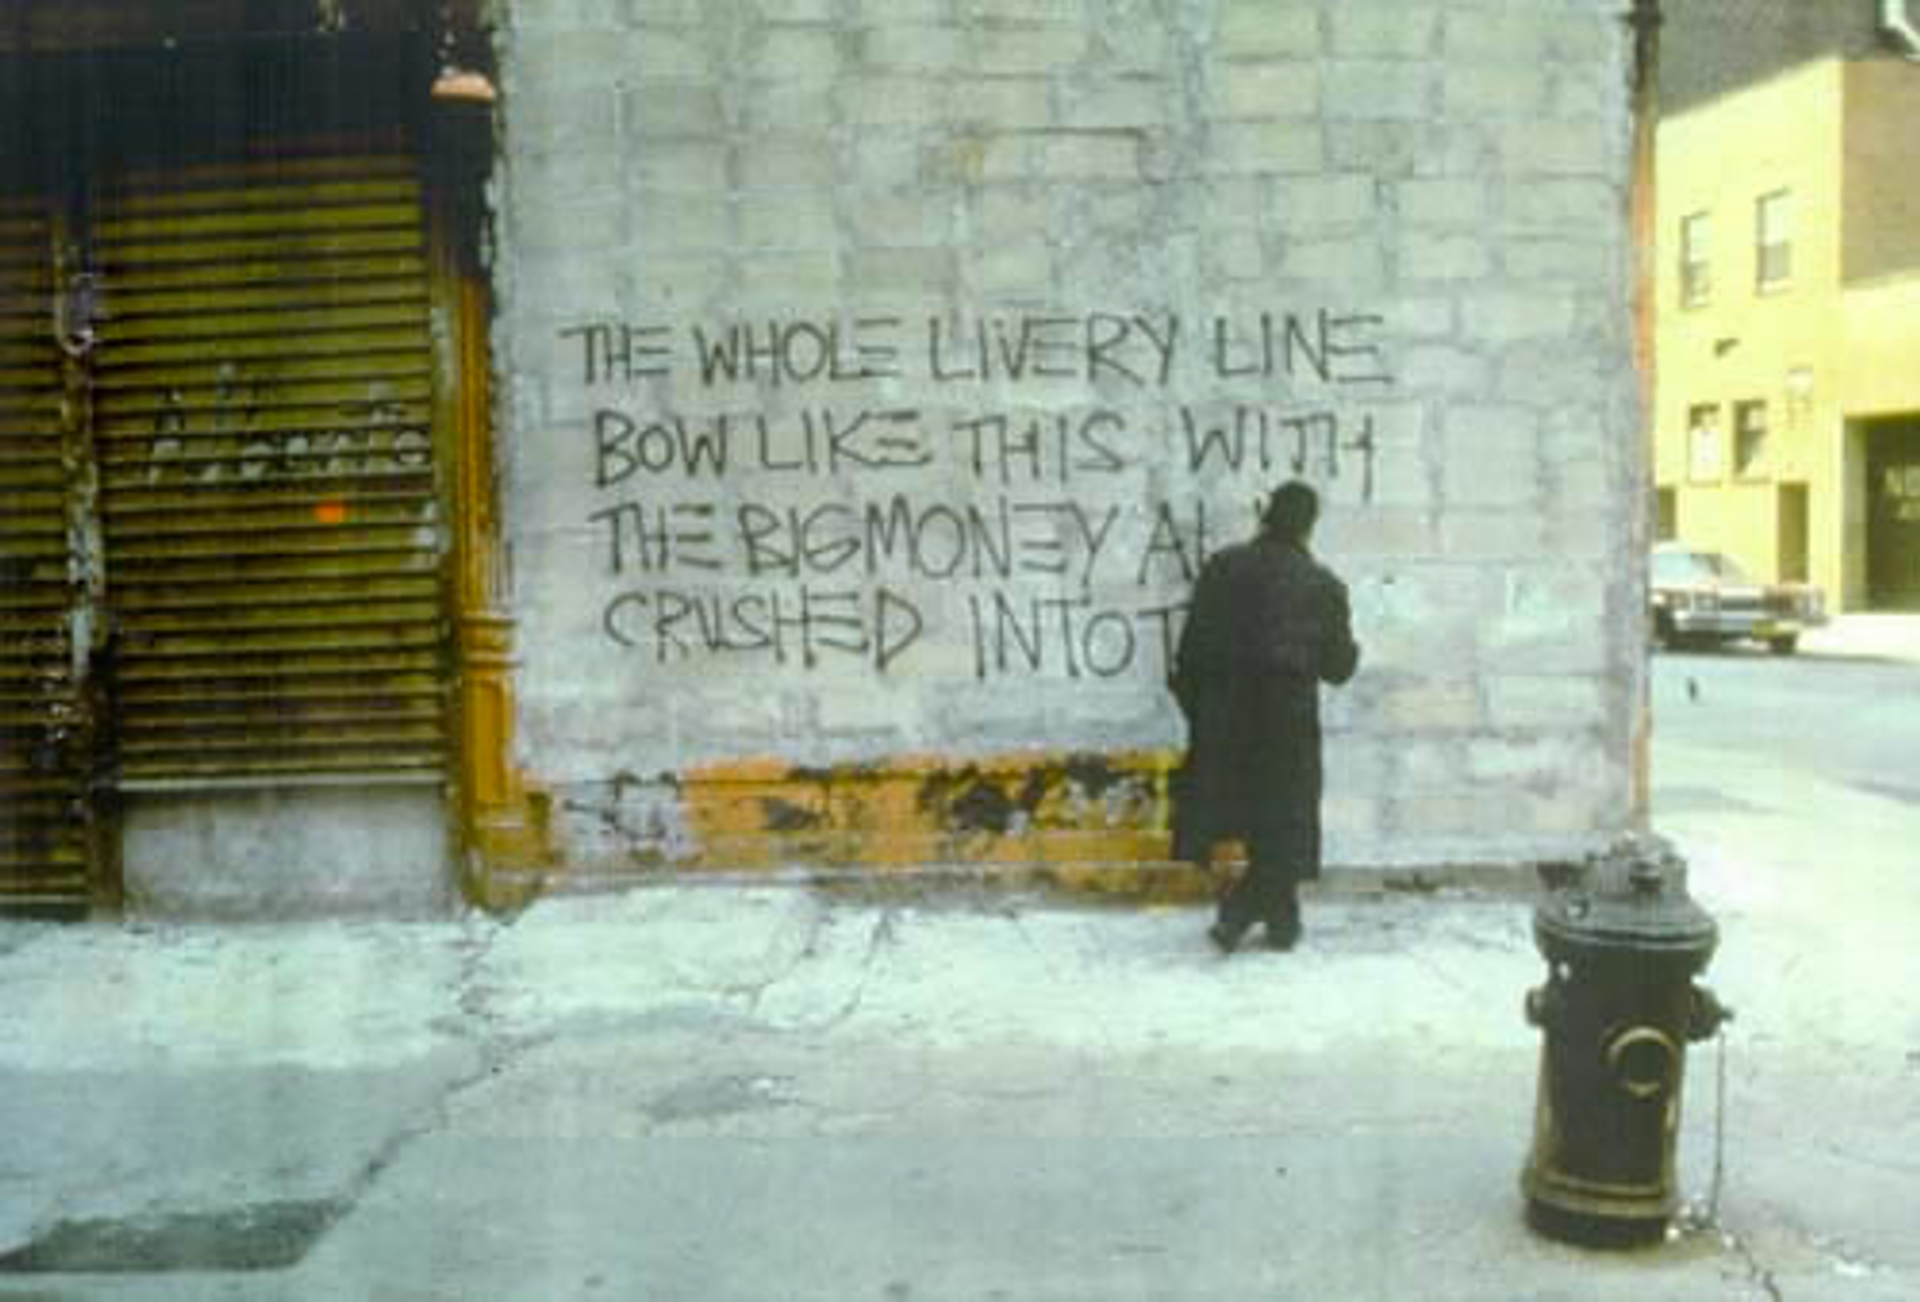 This photograph shows Basquiat spraypainting on a wall the lines: the whole livery line  bow like this with  the big money all  crushed into these feet